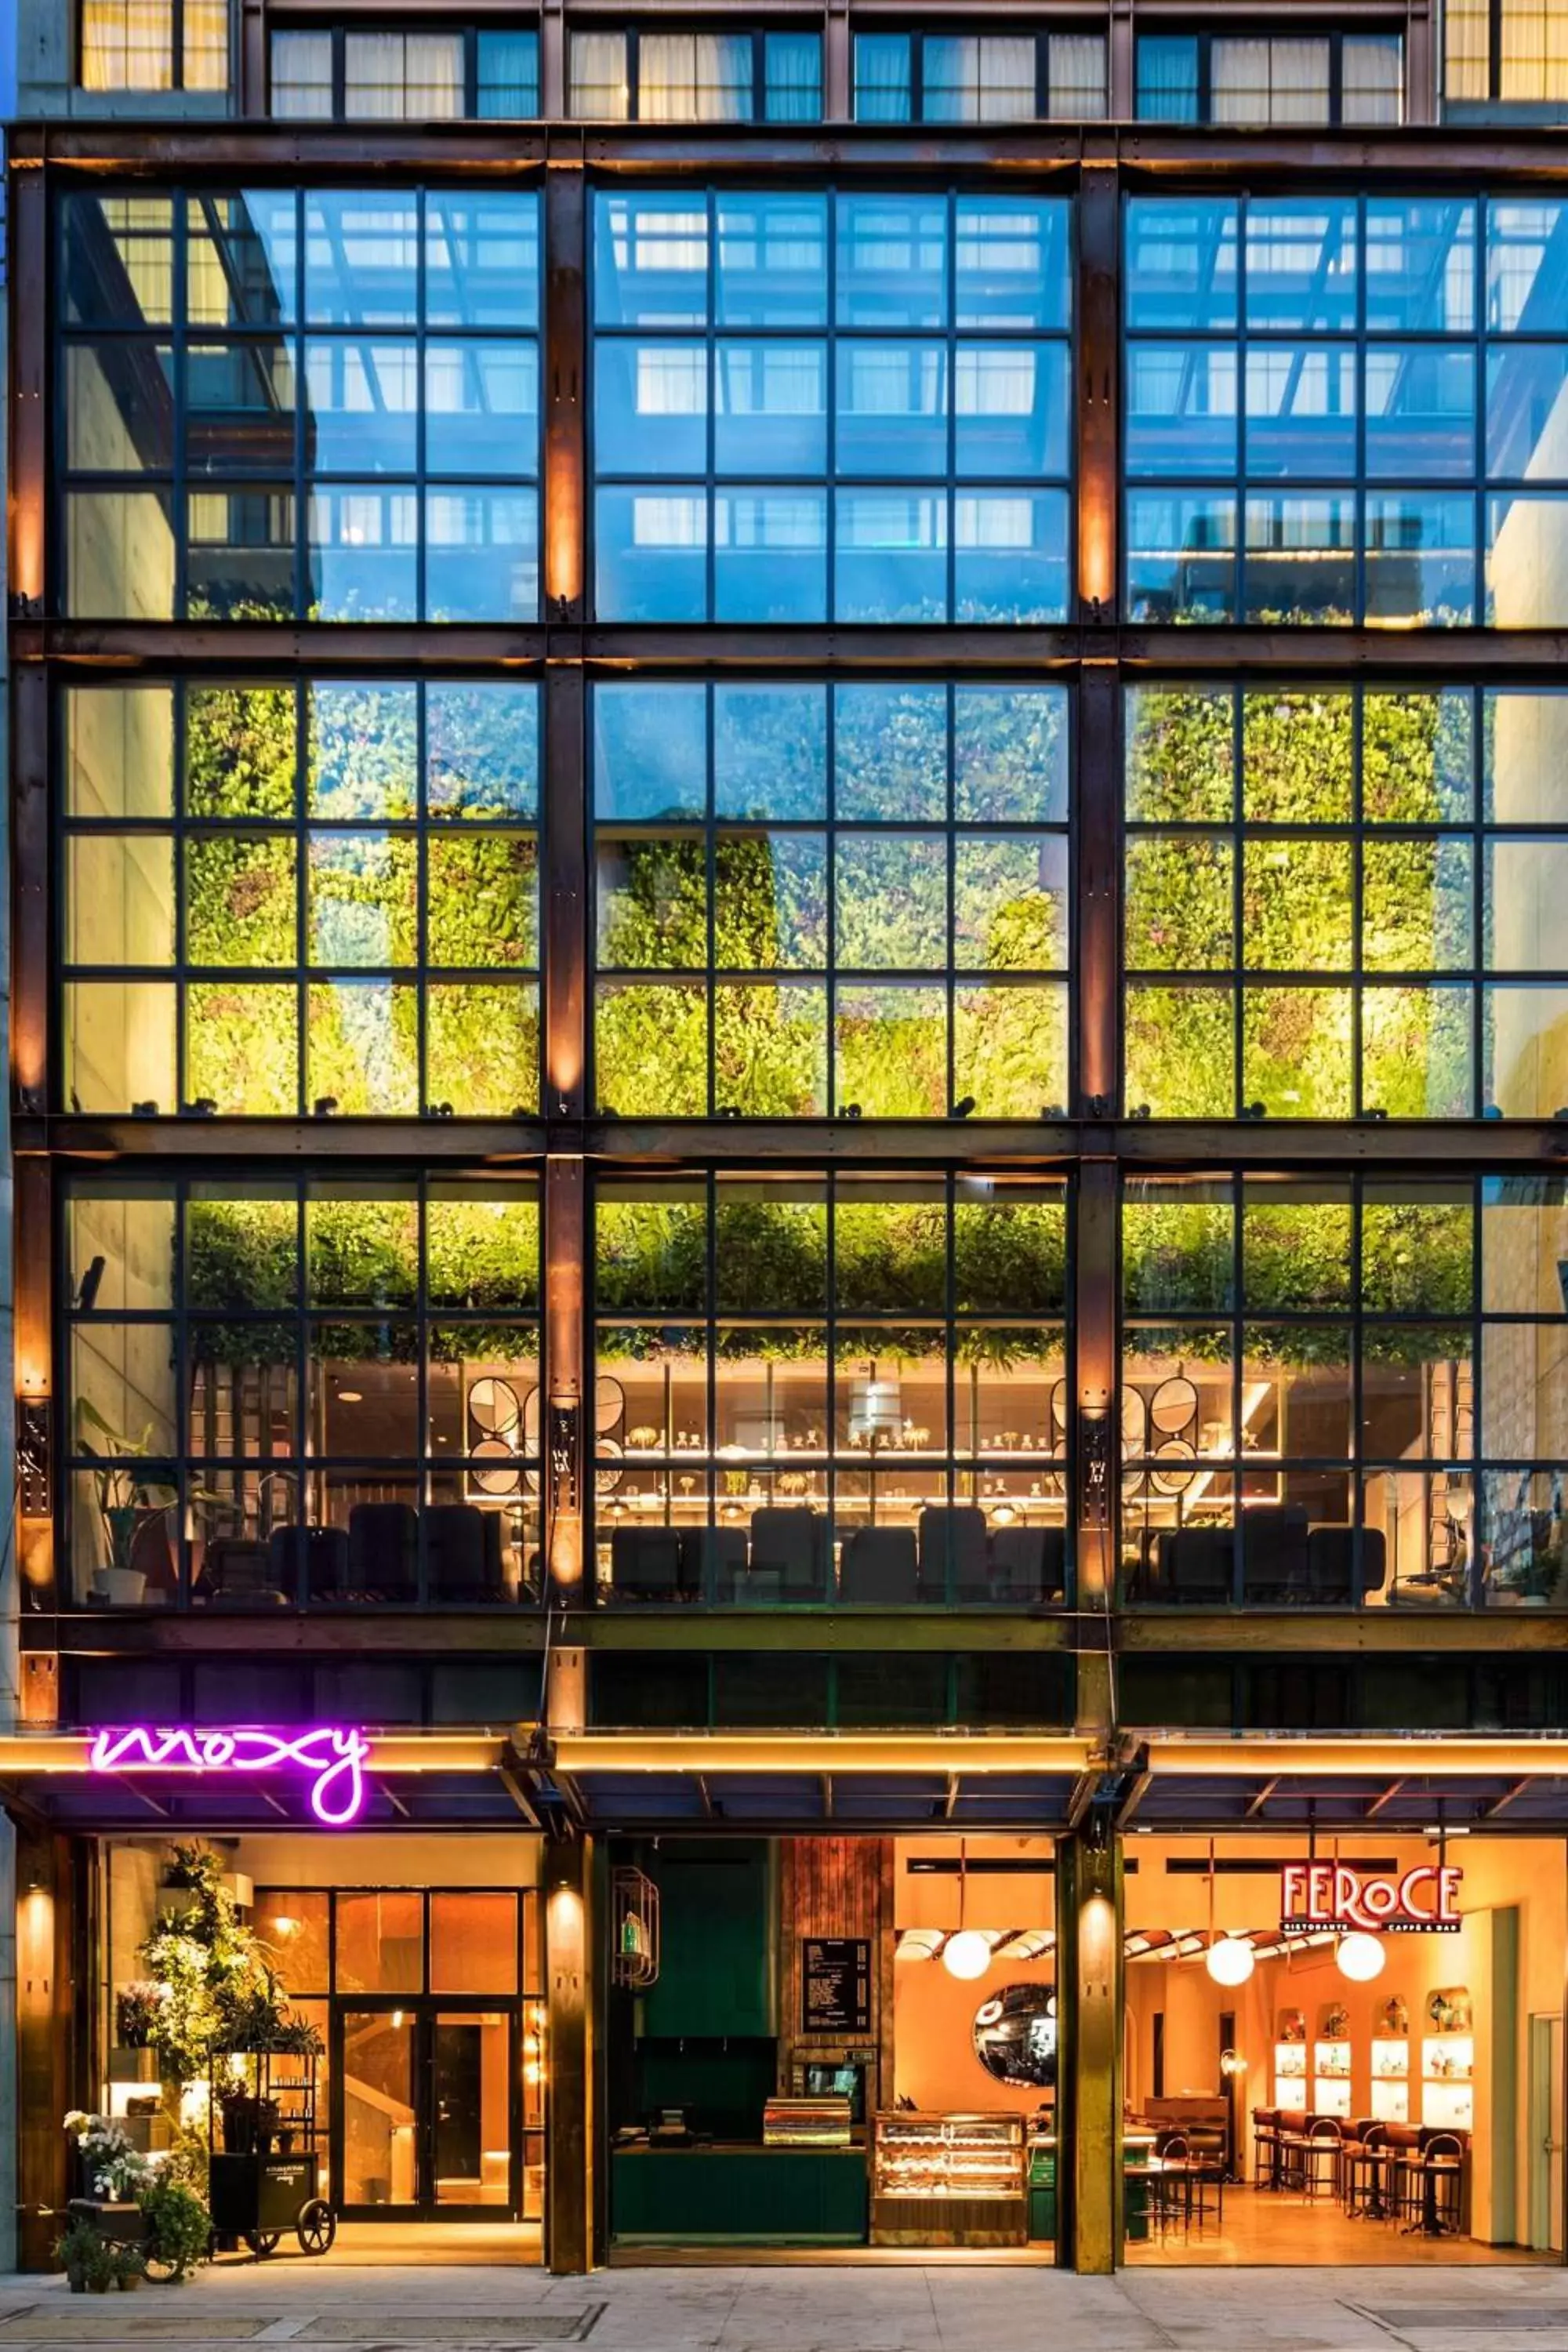 Property building in Moxy NYC Chelsea